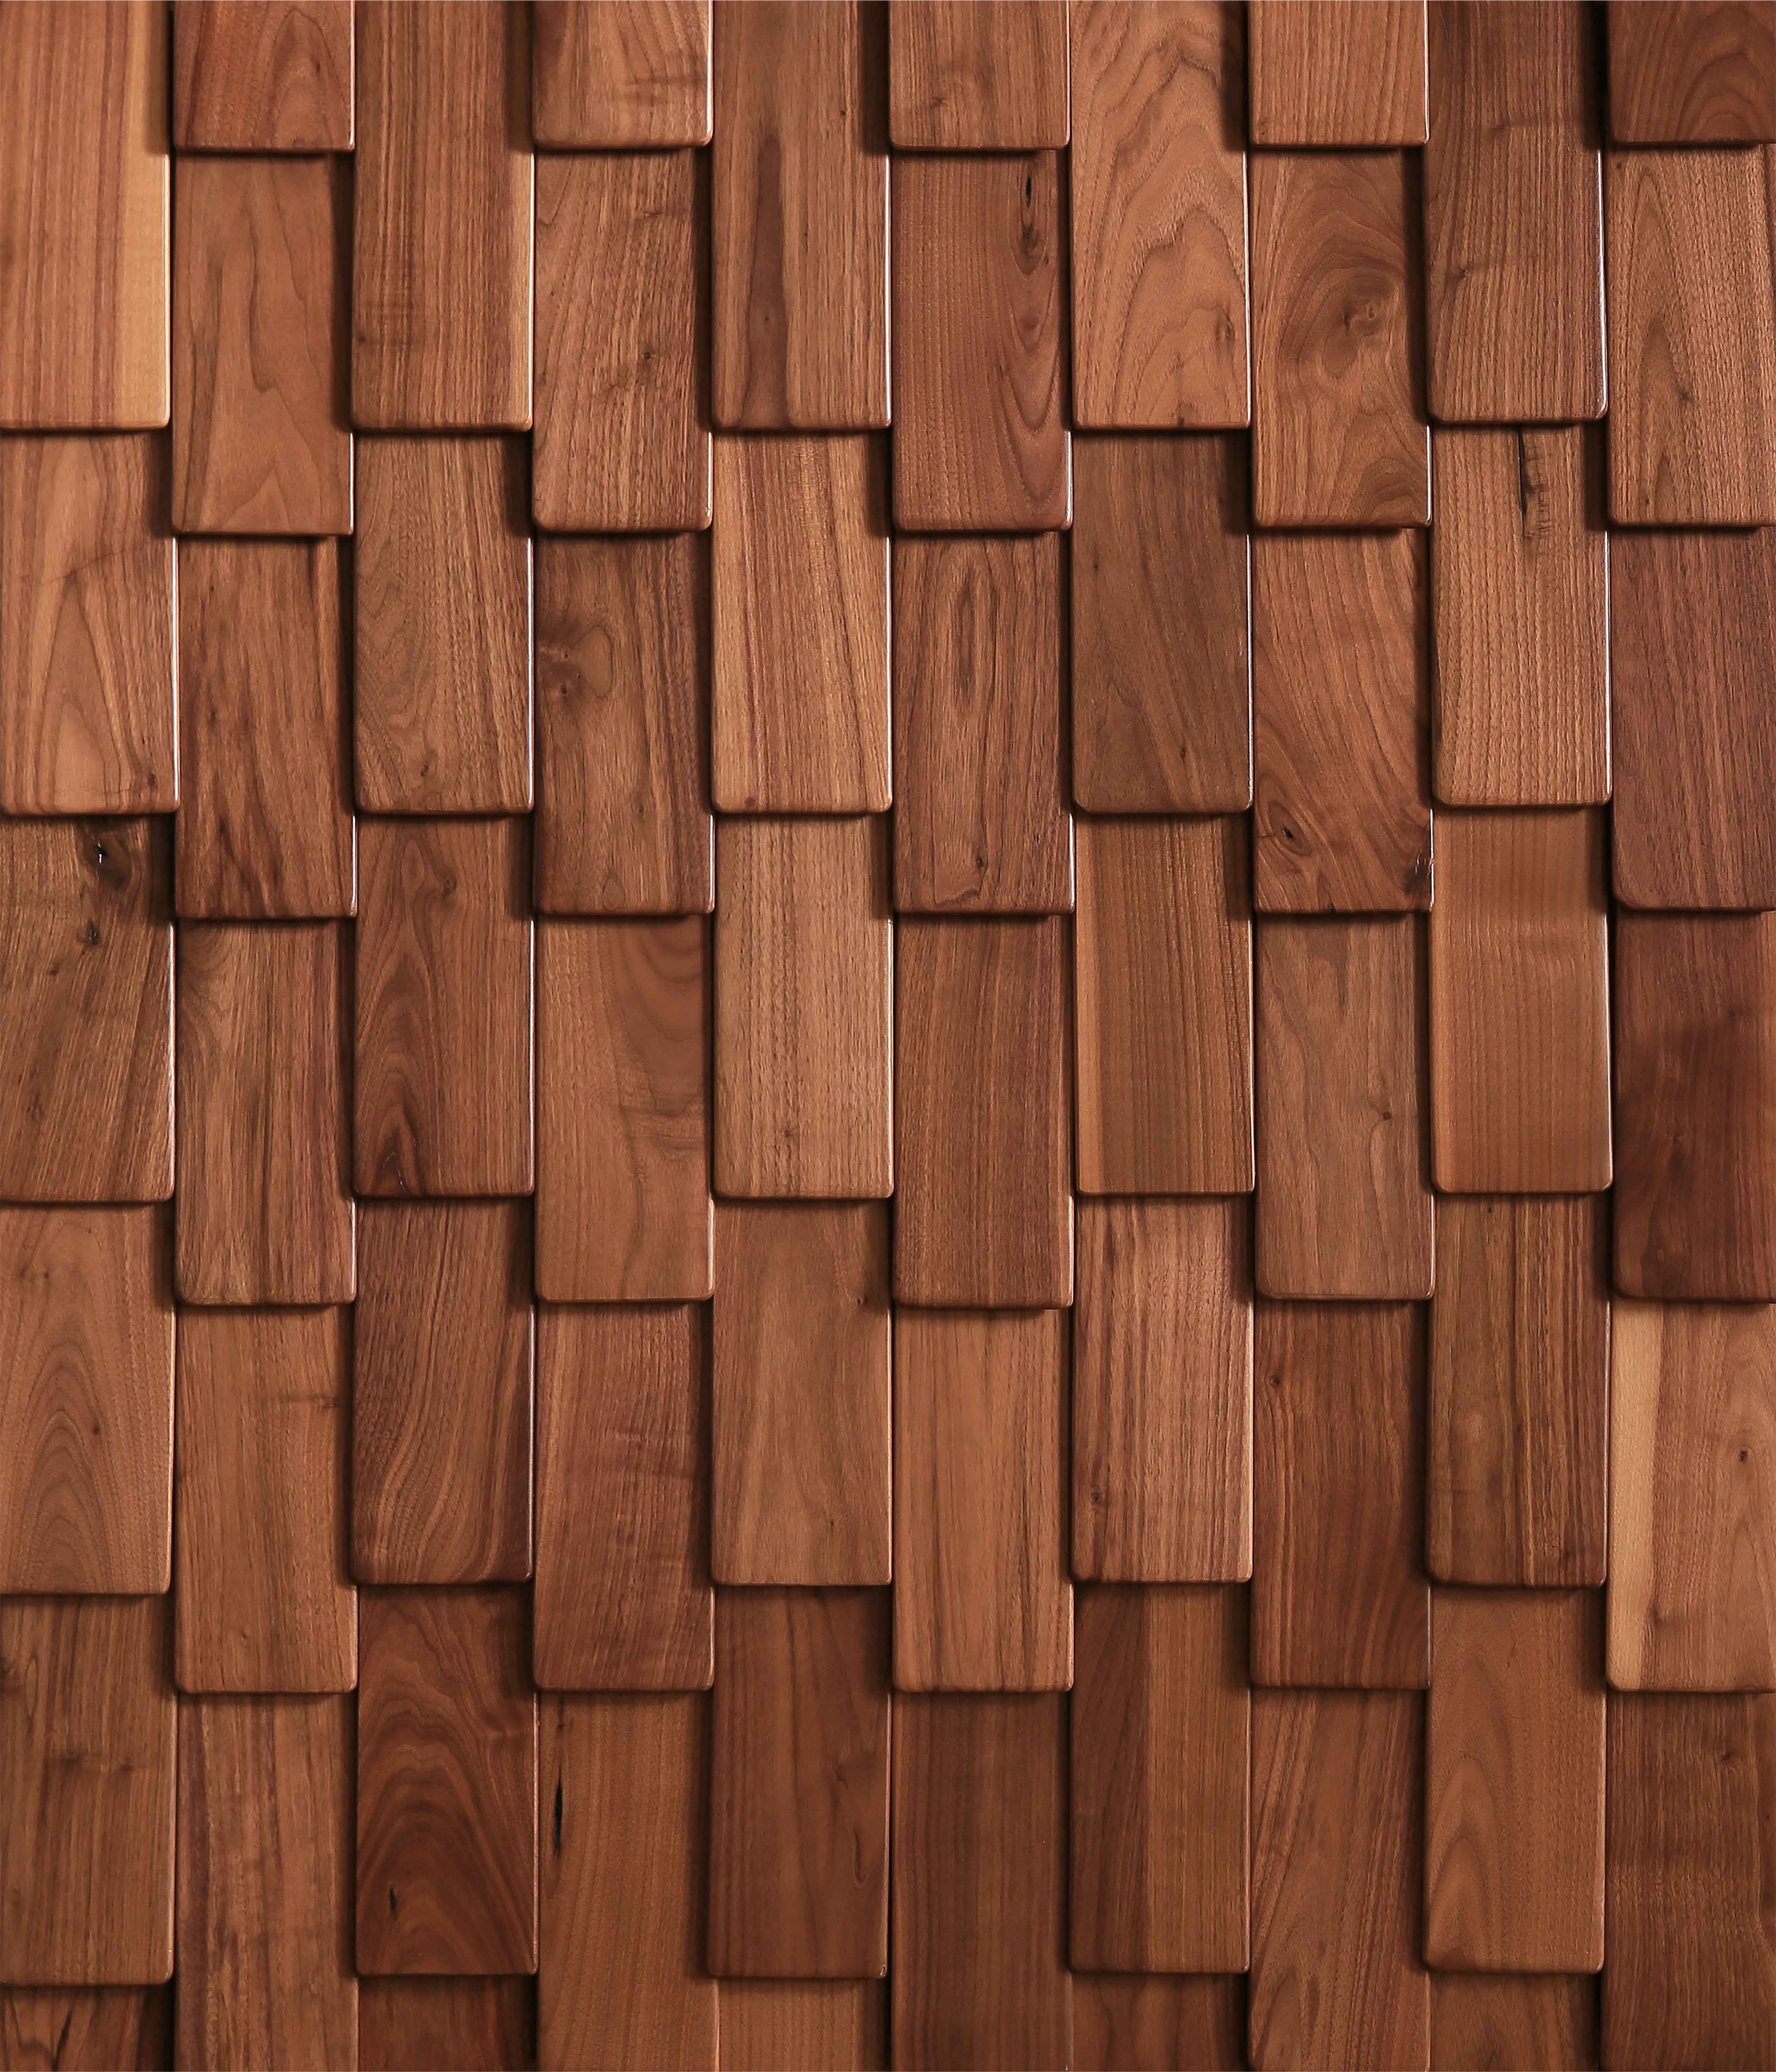 duchateau inceptiv scale reckt american walnut three dimensional wall natural wood panel conversion varnish for interior use distributed by surface group international